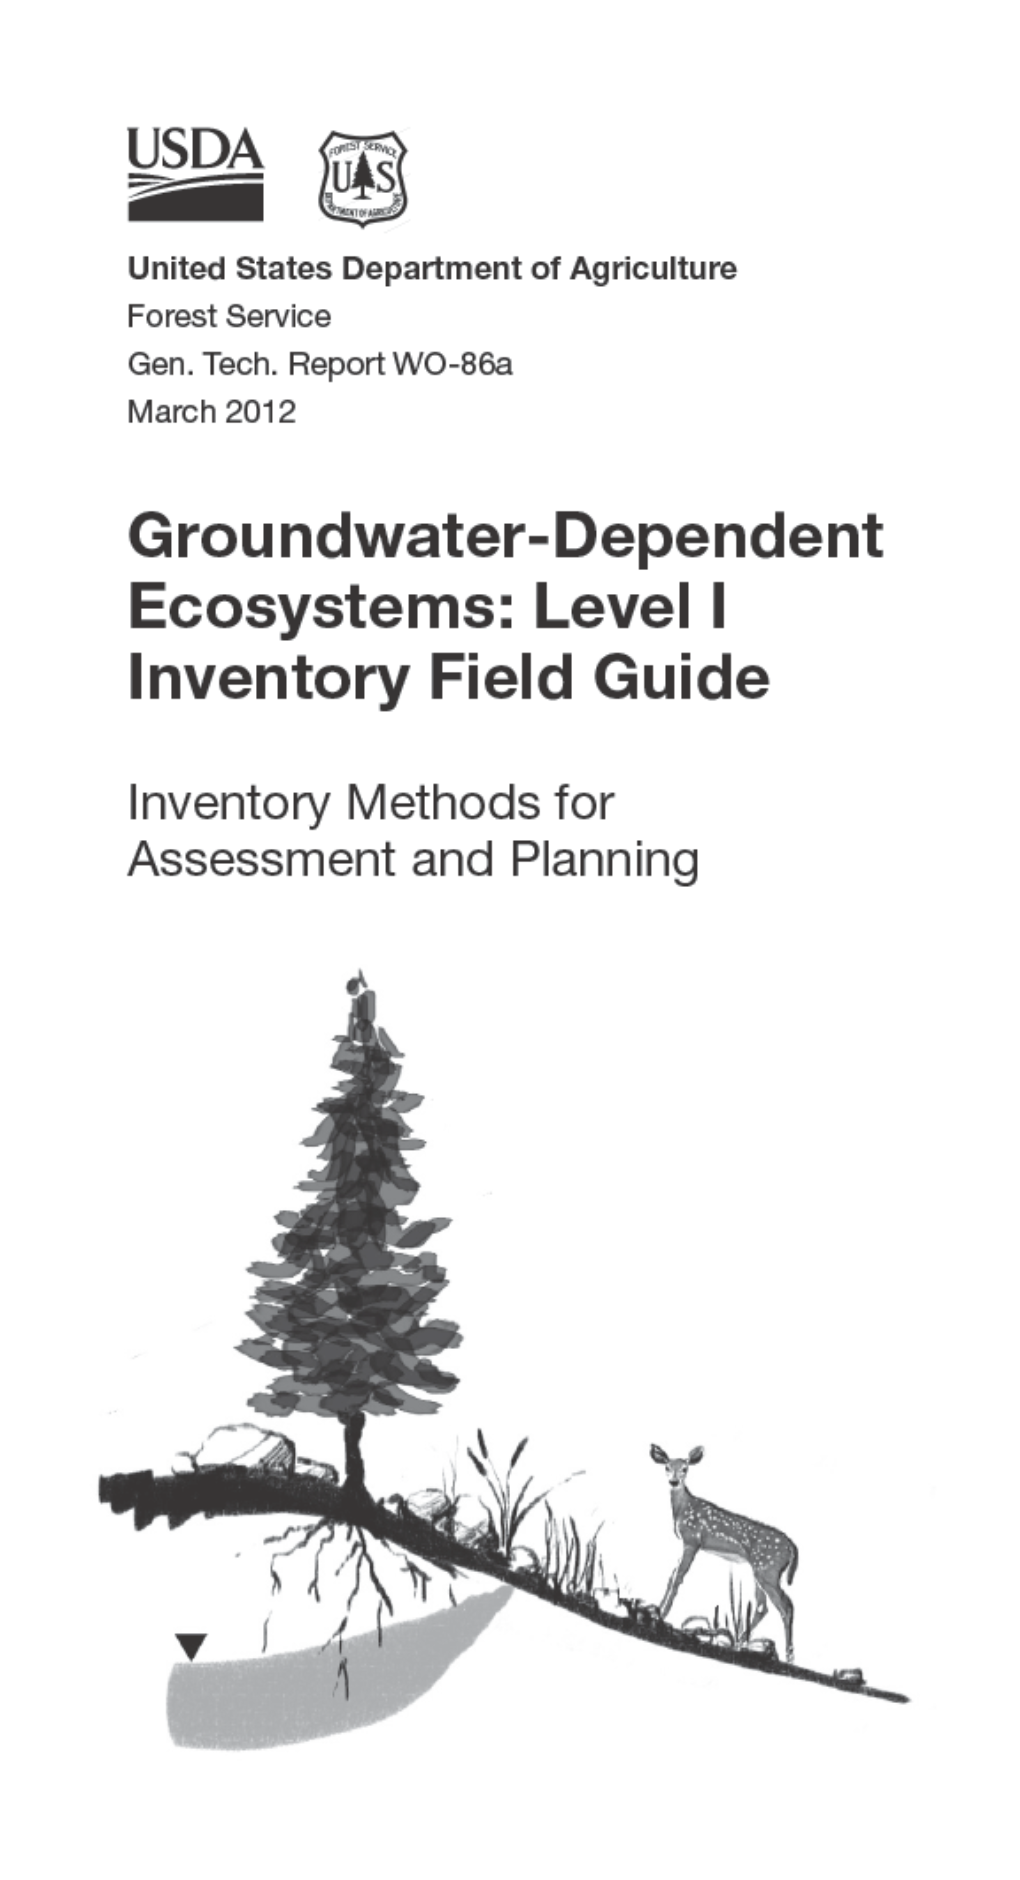 Groundwater-Dependent Ecosystems: Level I Inventory Field